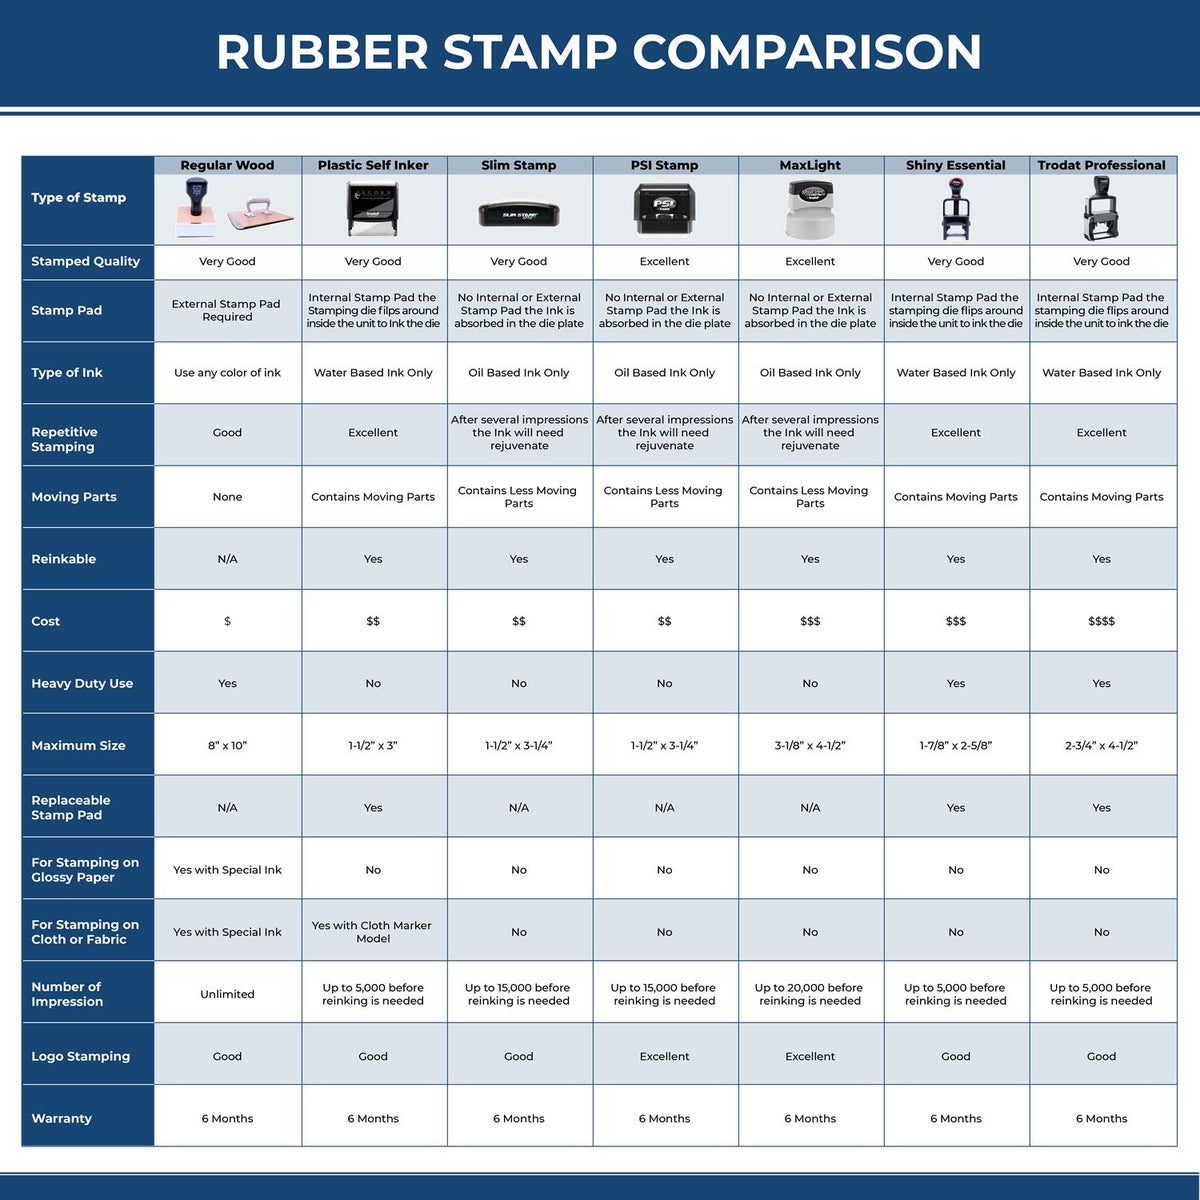 A comparison chart for the different types of mount models available for the PSI Texas Notary Stamp.